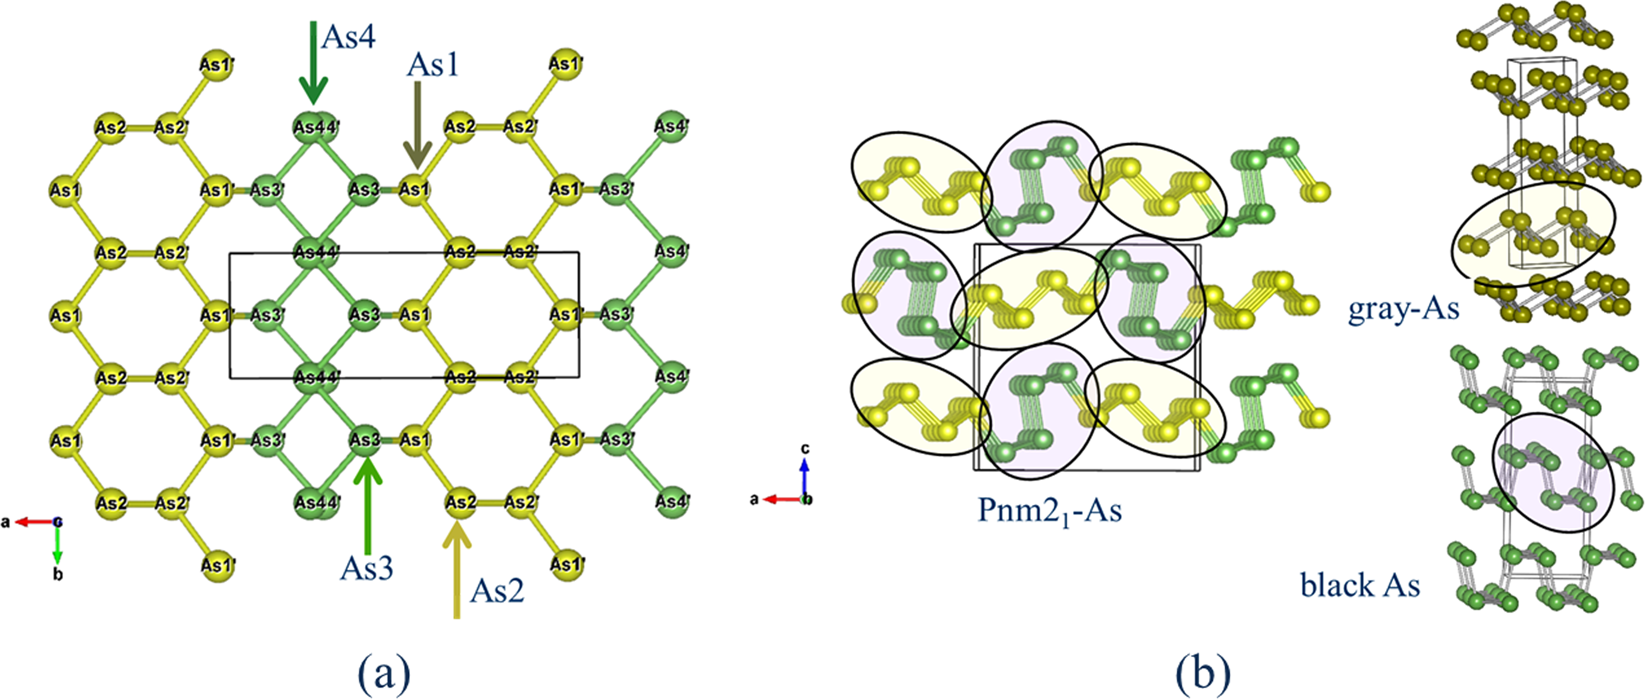 Natural arsenic with a unique order structure: potential for new quantum ma...